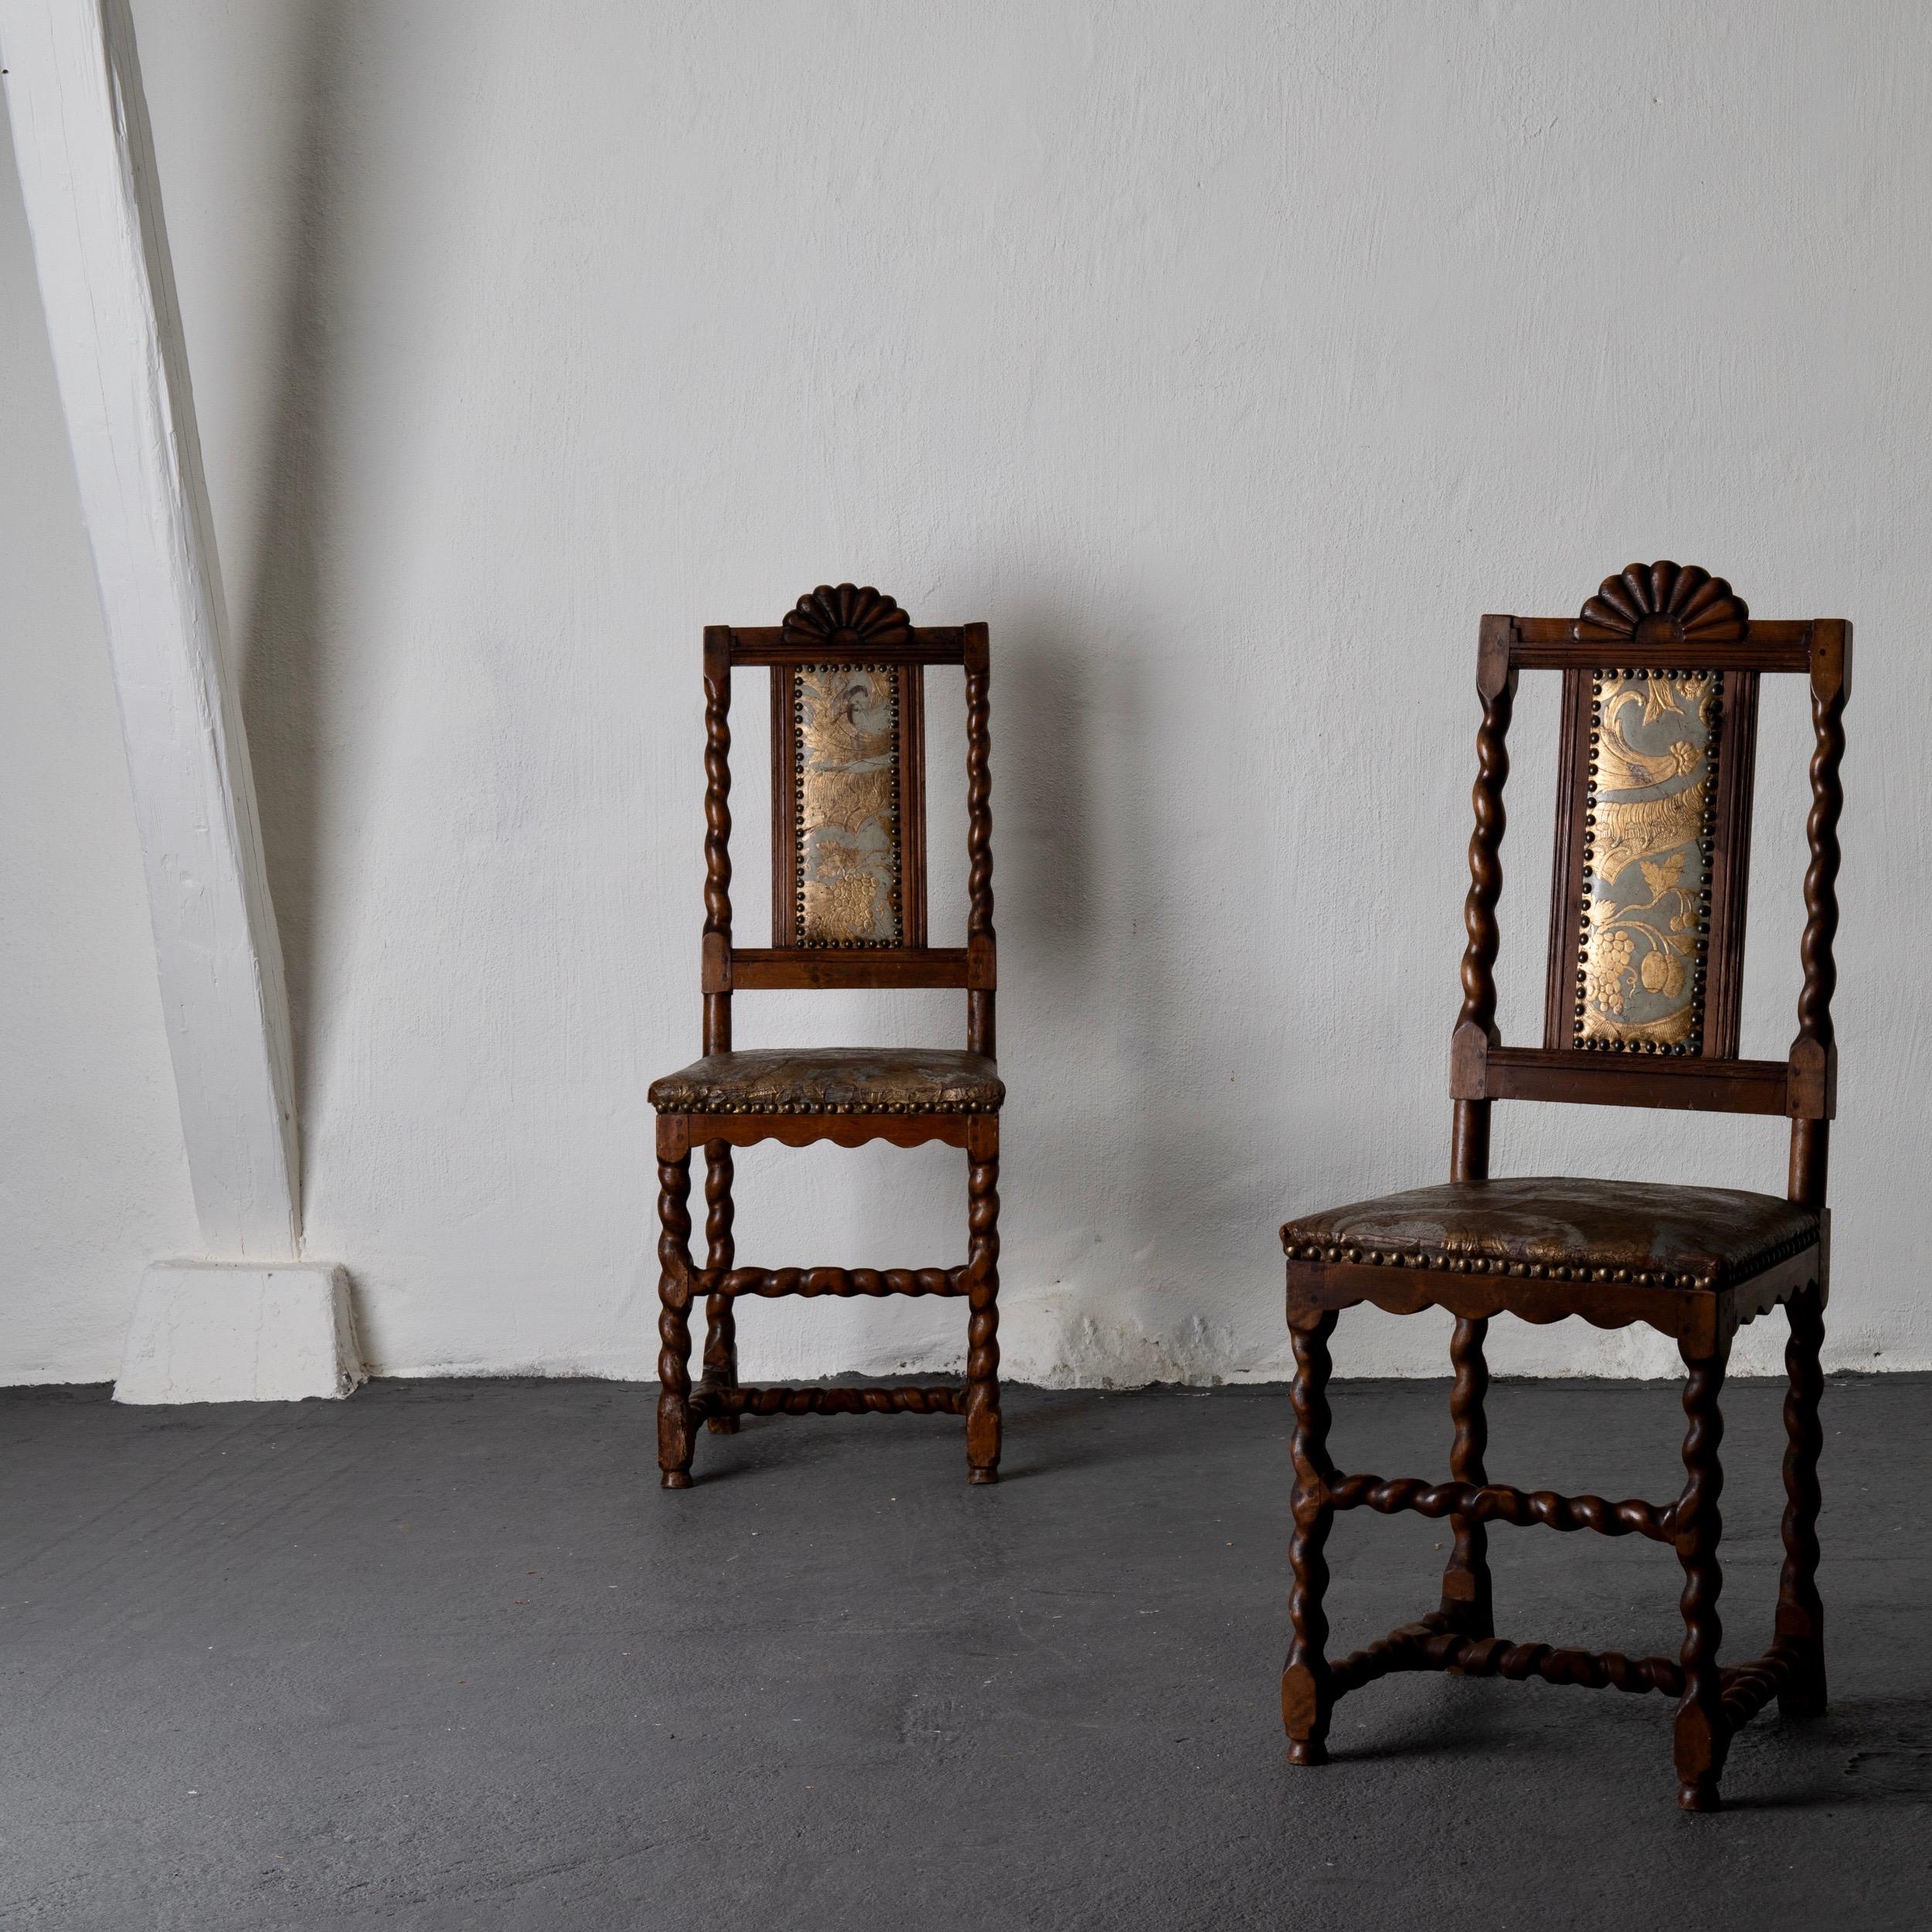 Chairs Swedish Baroque oak brown gilt leather light blue Sweden. Pair of side chairs Baroque Sweden. A pair of side chairs made during the Baroque period in Sweden. Frame in stained birch and upholstered in gilt leather.

 